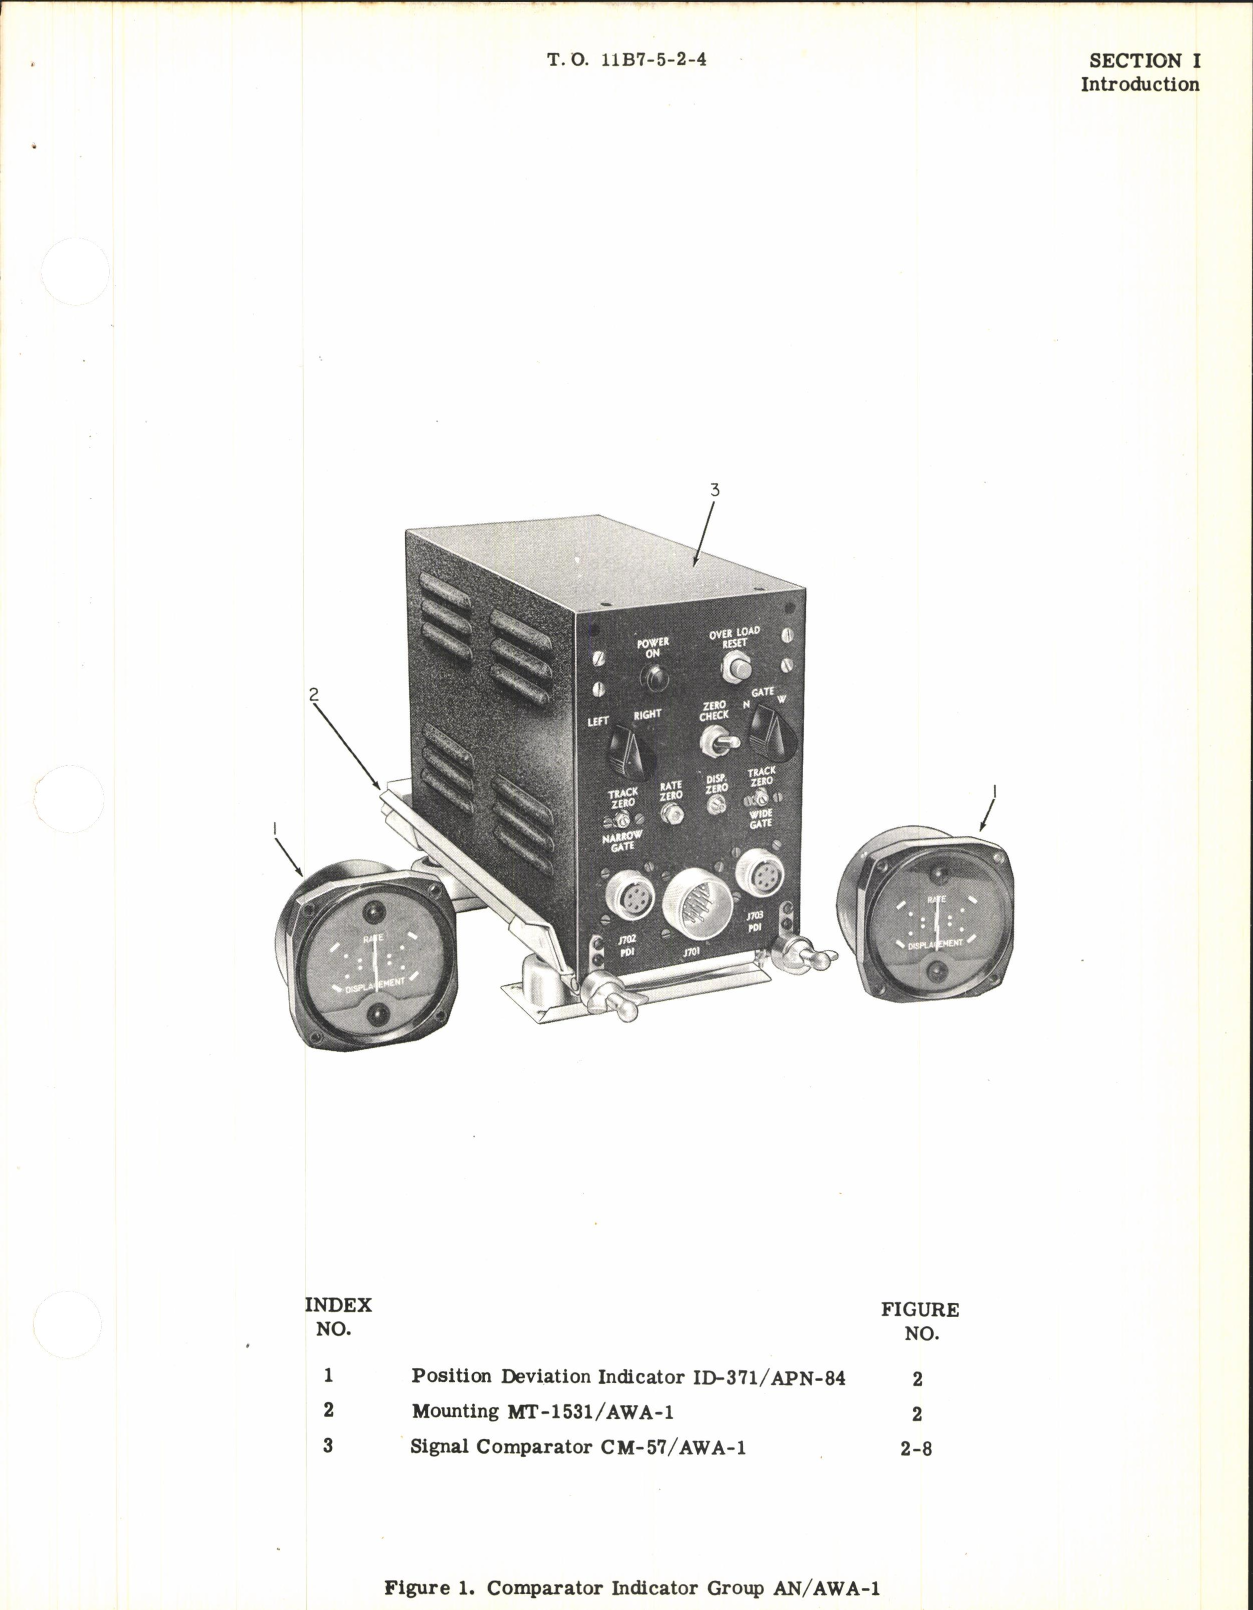 Sample page 7 from AirCorps Library document: Illustrated Parts Breakdown for Comparator Indicator Group AN/AWA-1